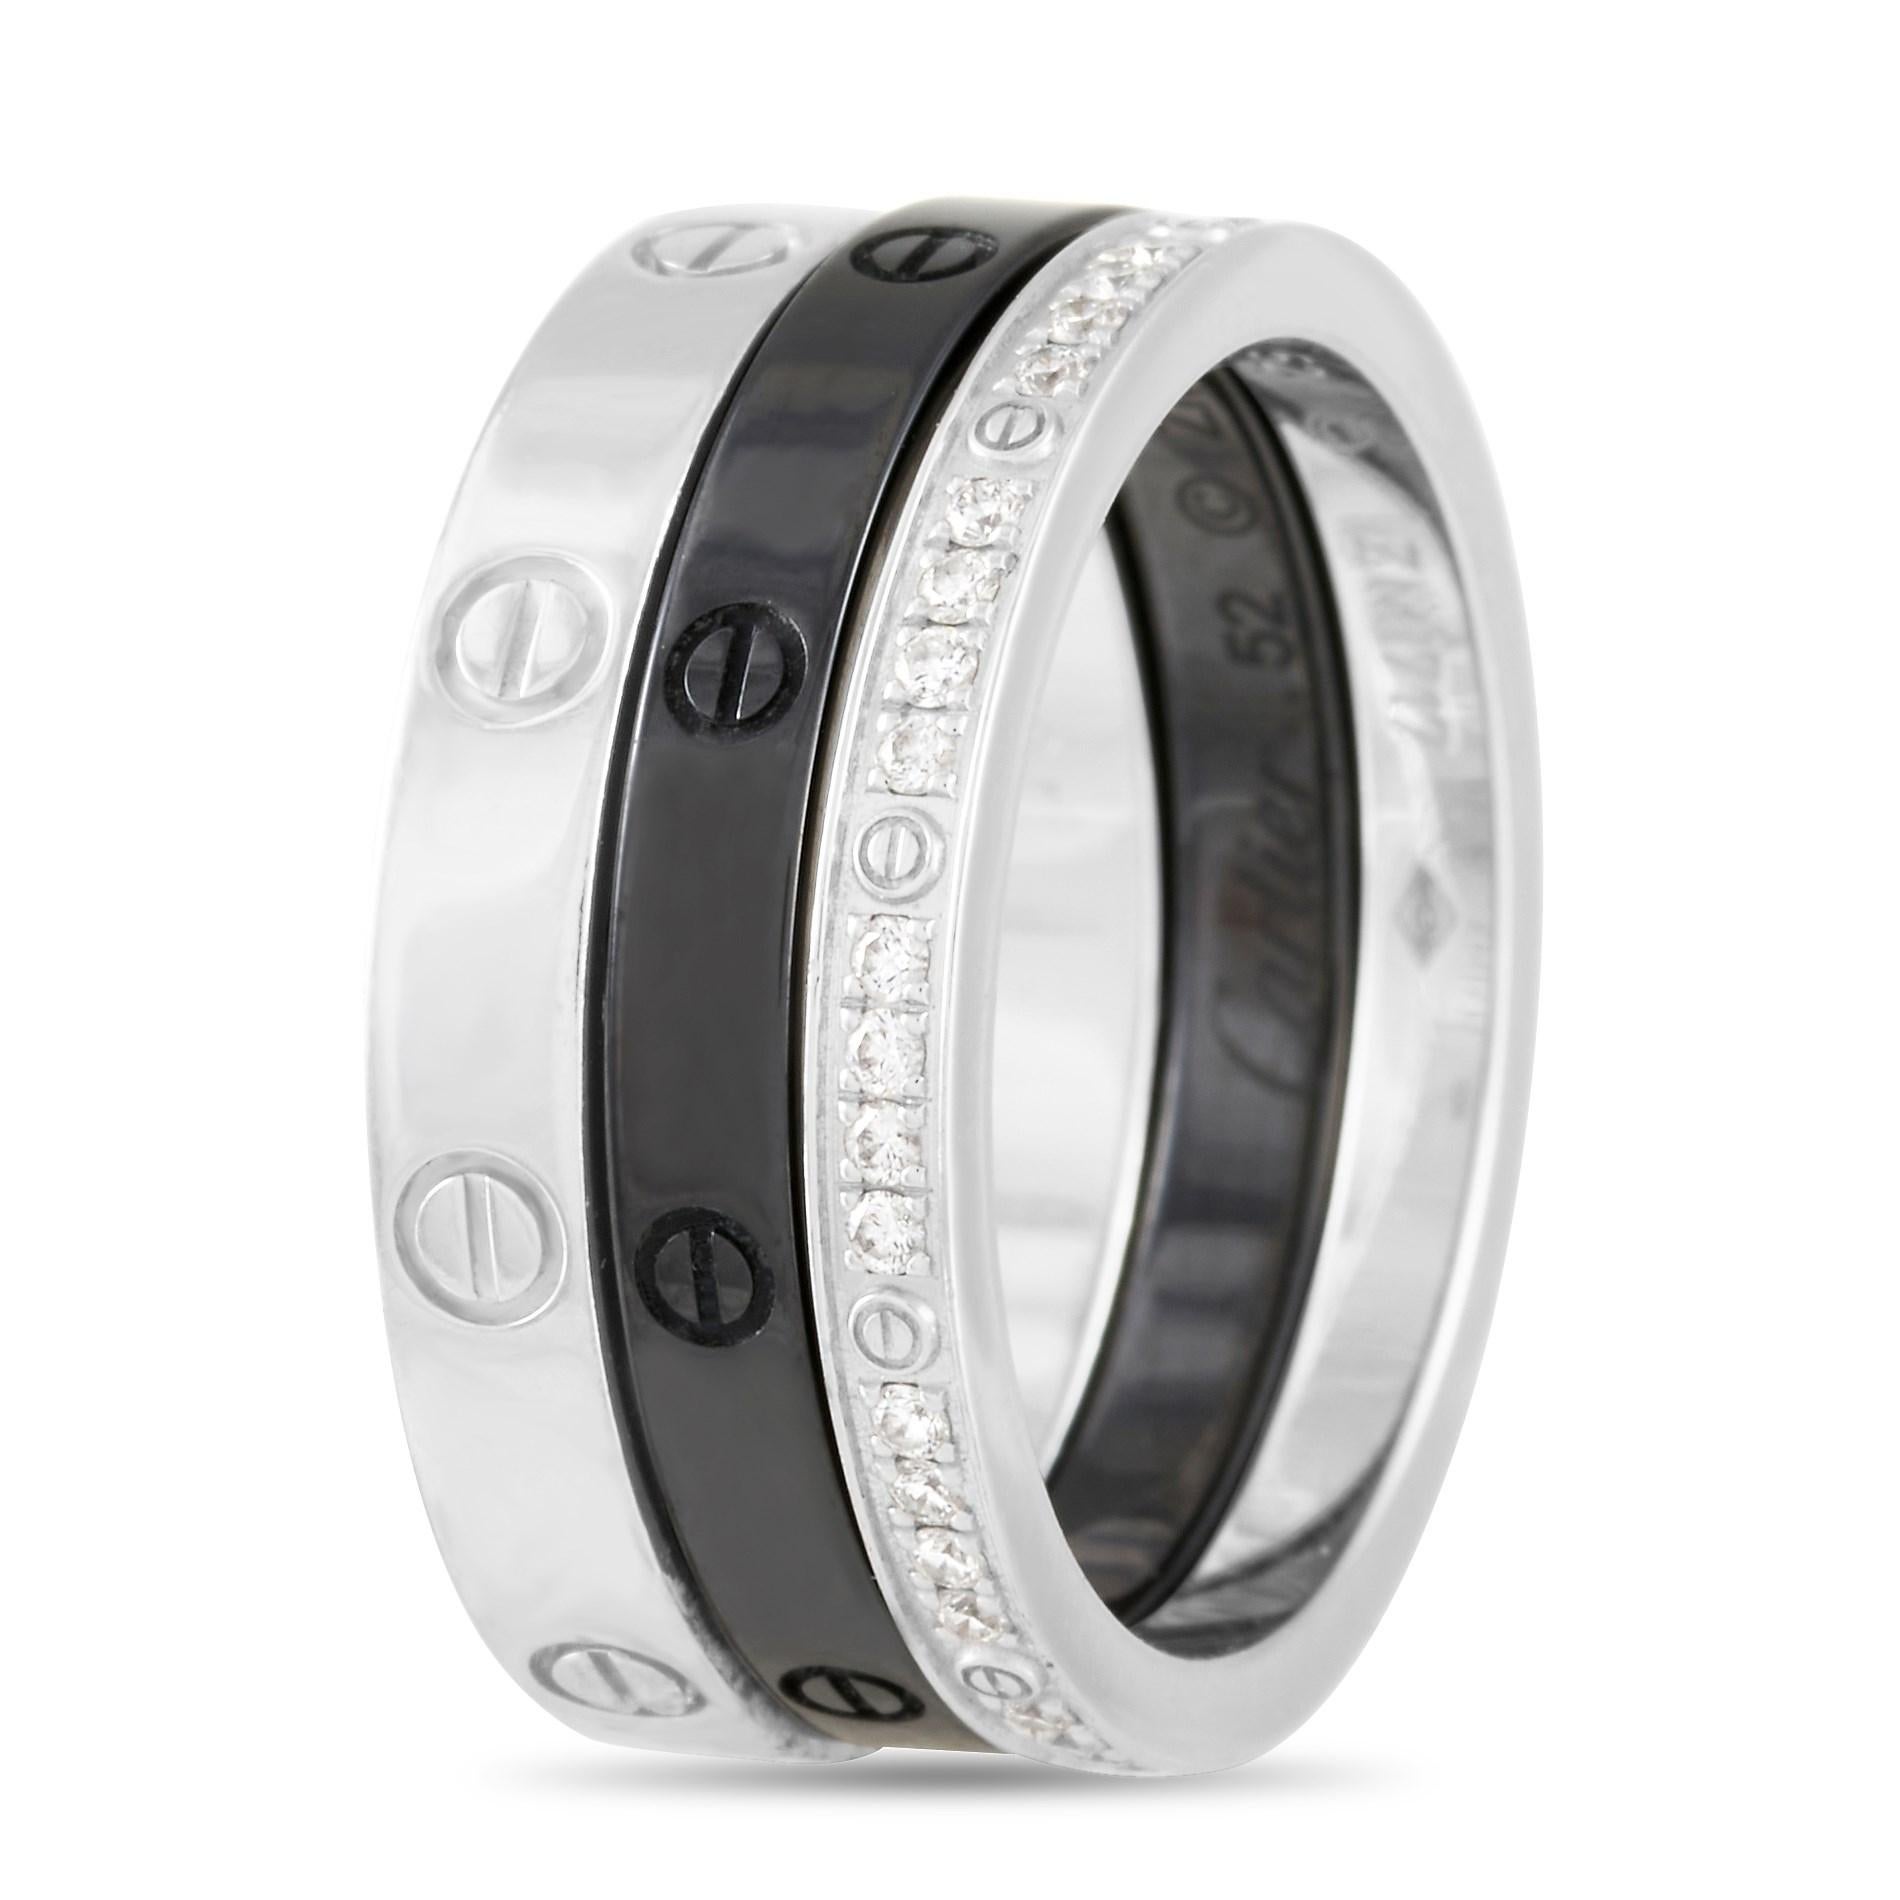 This Cartier 18K White Gold and Ceramic Diamond Love 3 Ring Set is comprised of three bands, two made with 18K white gold and one of black ceramic. The first white gold band measures 2 mm and is set with round-cut diamonds throughout as well as the